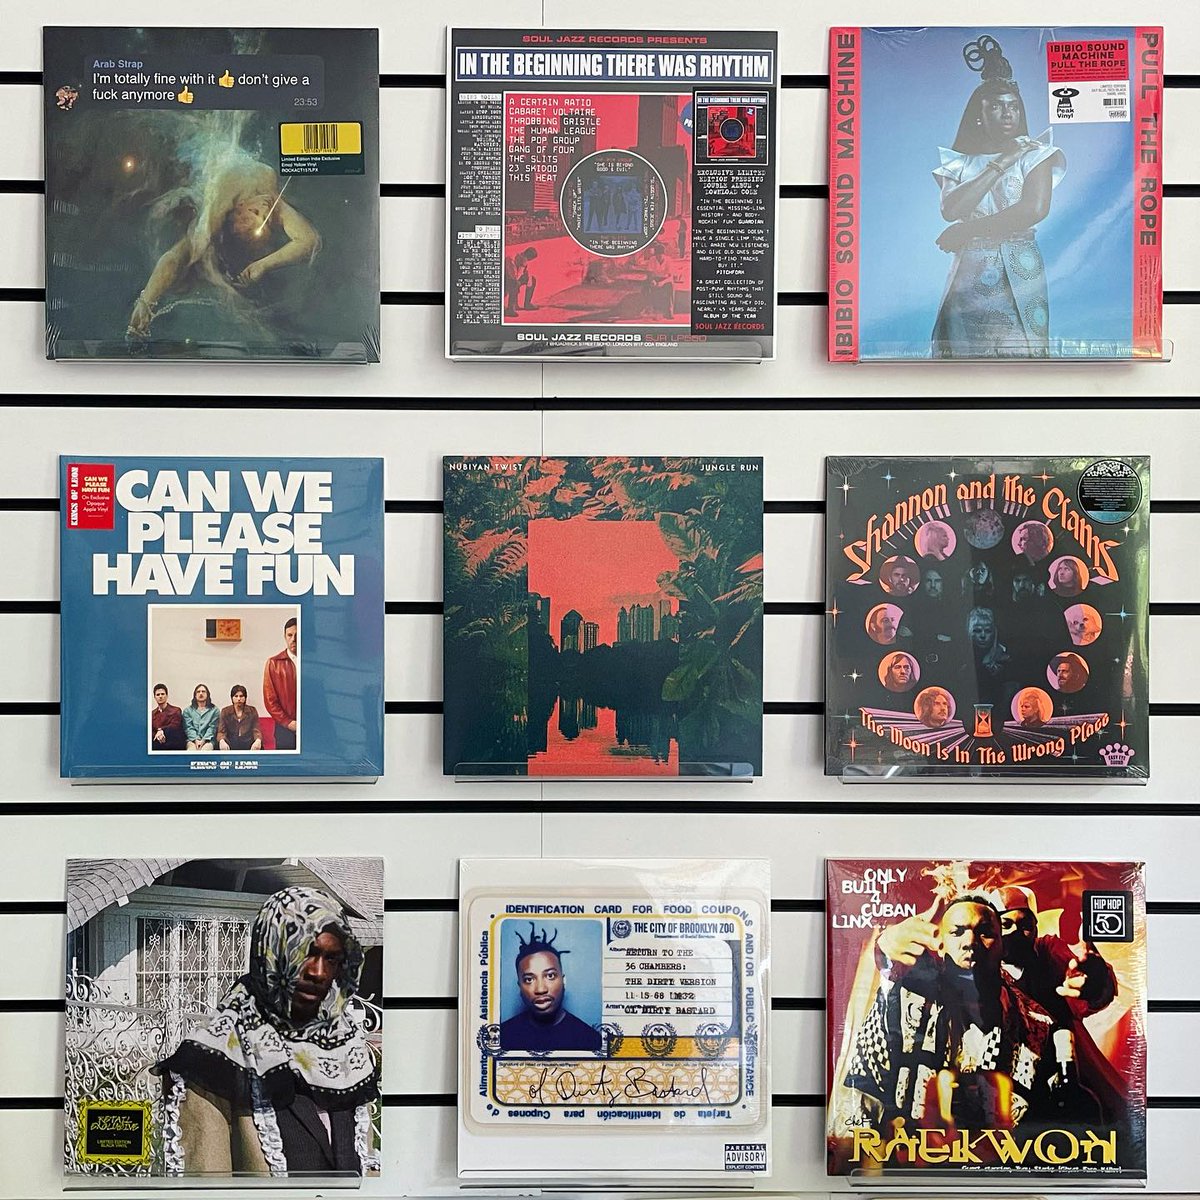 HAPPY FRIDAY!! 🎉 We have a big one for you this week (part 1): Featuring a line up of Arab Strap, In The Beginning There Was Rhythm, Ibibio Sound Machine, Kings Of Leon, Nubiyan Twist, Shannon & The Clams, JPEGMAFIA, ODB, Raekwon and more! Find them at mixeduprecords.com